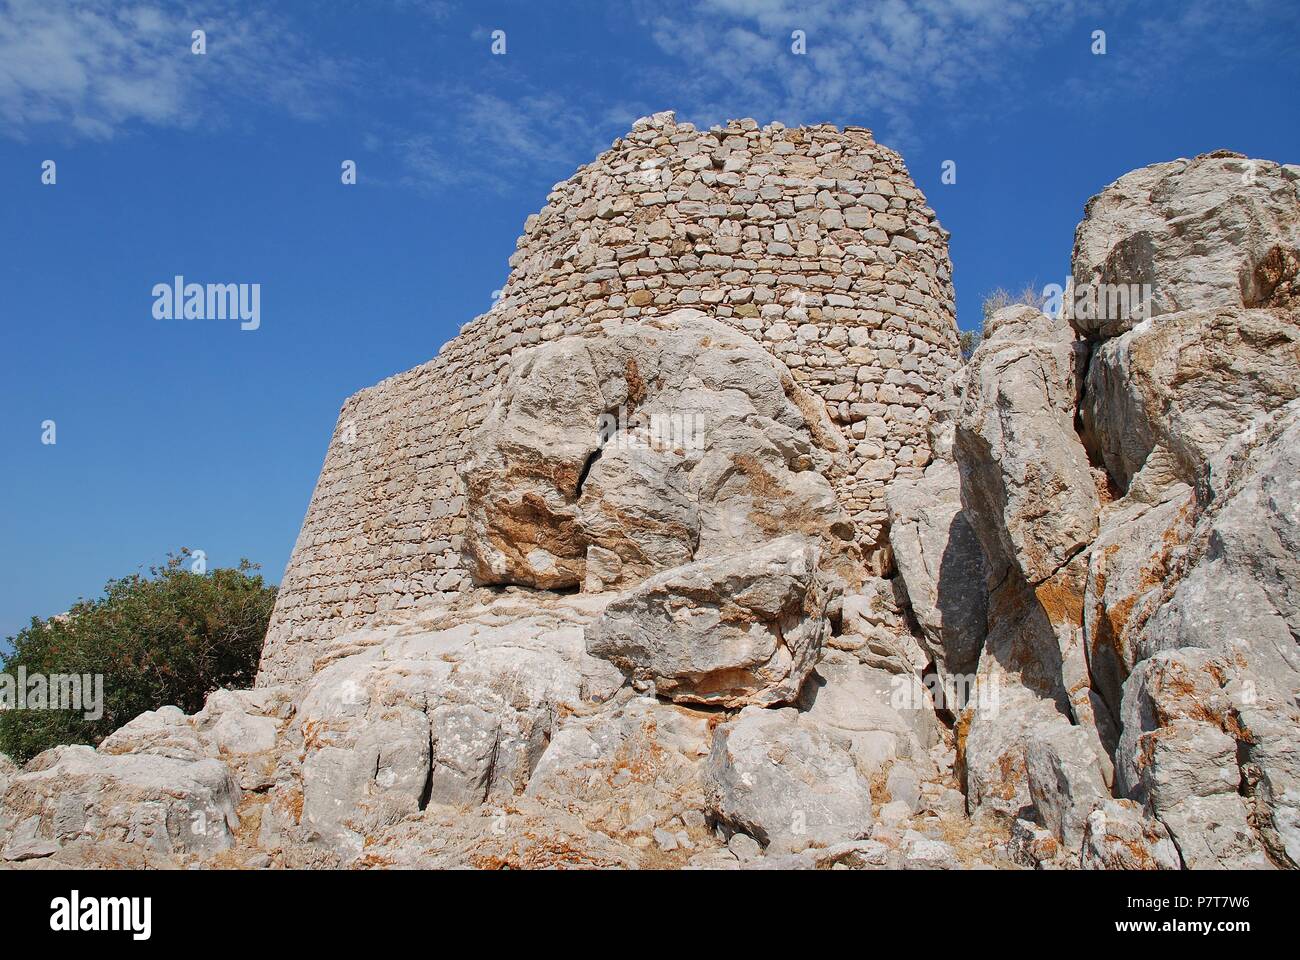 The remains of the Crusader Knights castle above Mikro Chorio on the Greek island of Tilos. Stock Photo